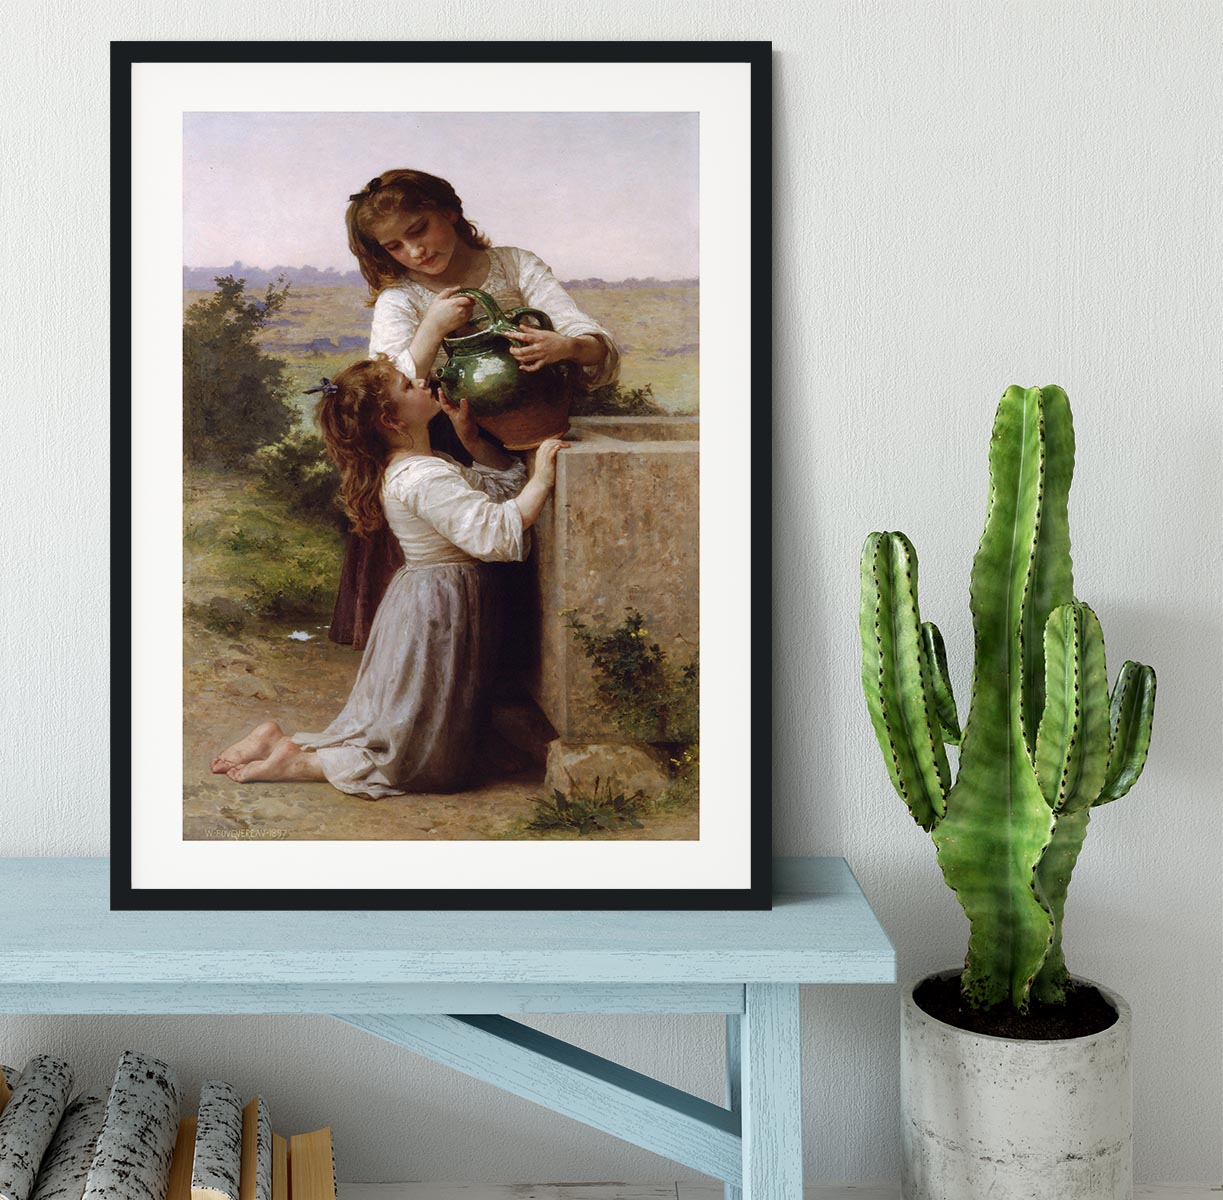 At The Fountain 2 By Bouguereau Framed Print - Canvas Art Rocks - 1